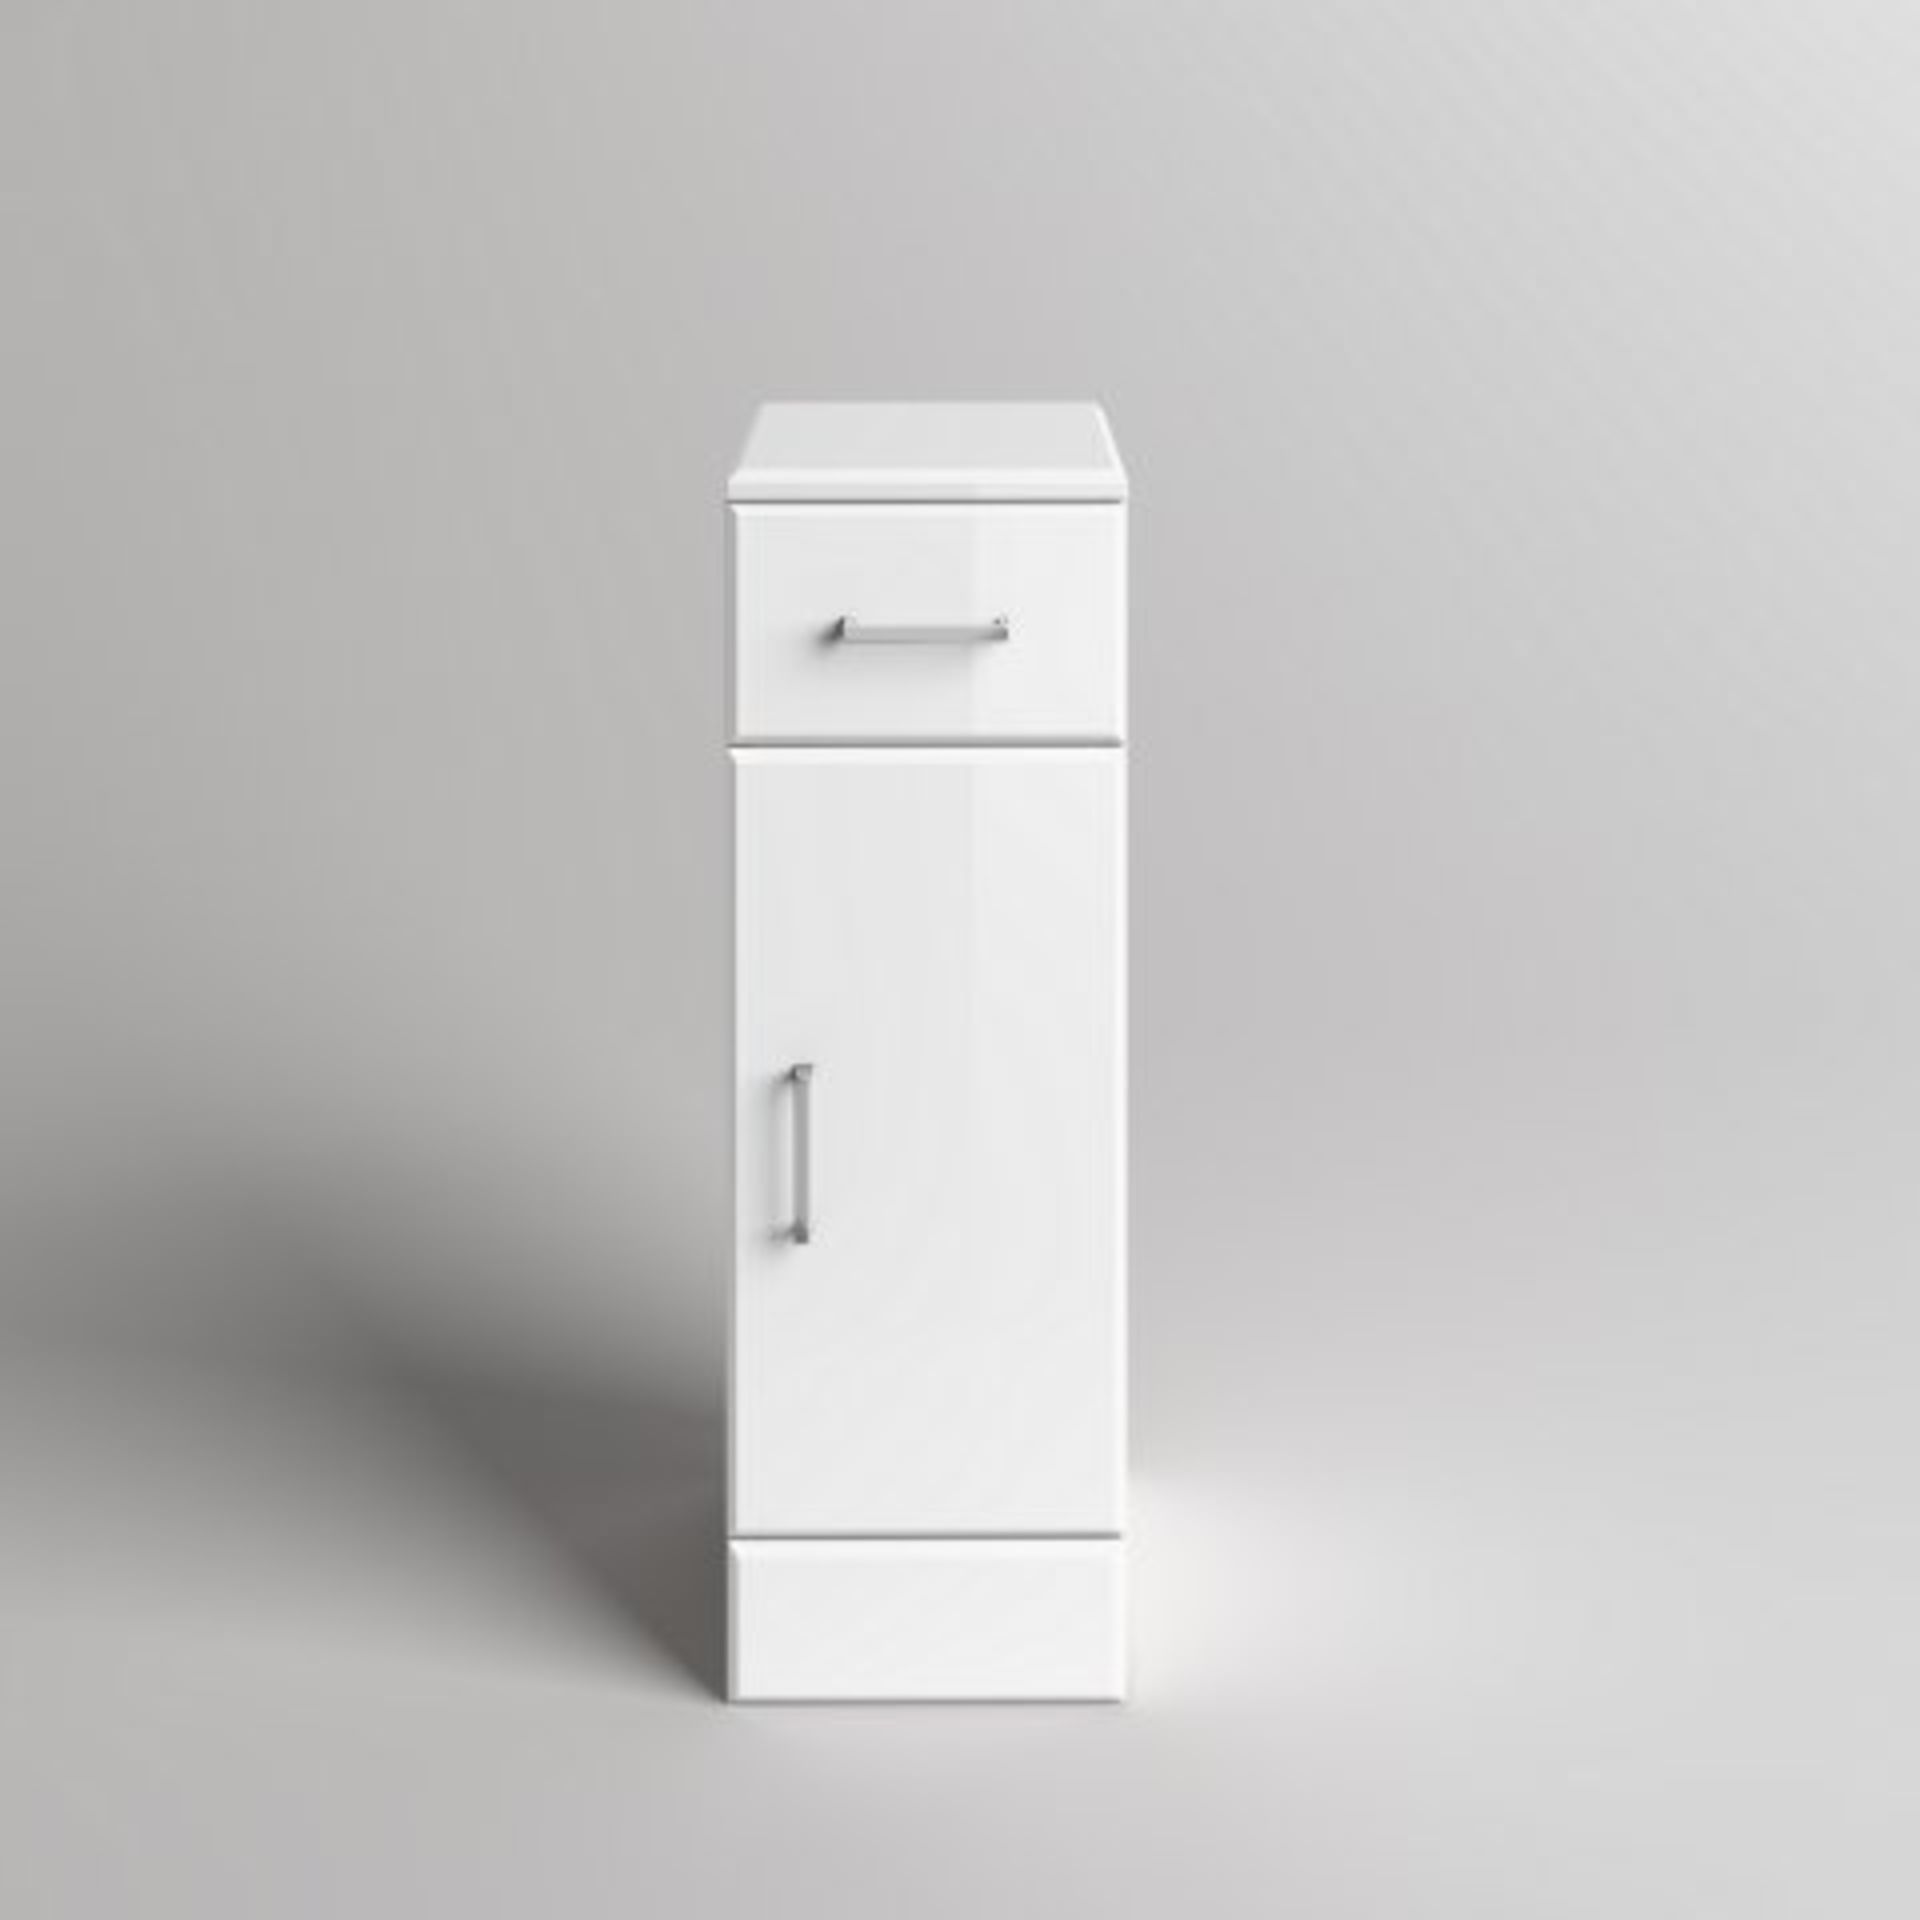 N5 - 250x300mm Quartz Gloss White Small Unit. RRP £143.99. This state-of-the-art white bathroom - Image 2 of 3